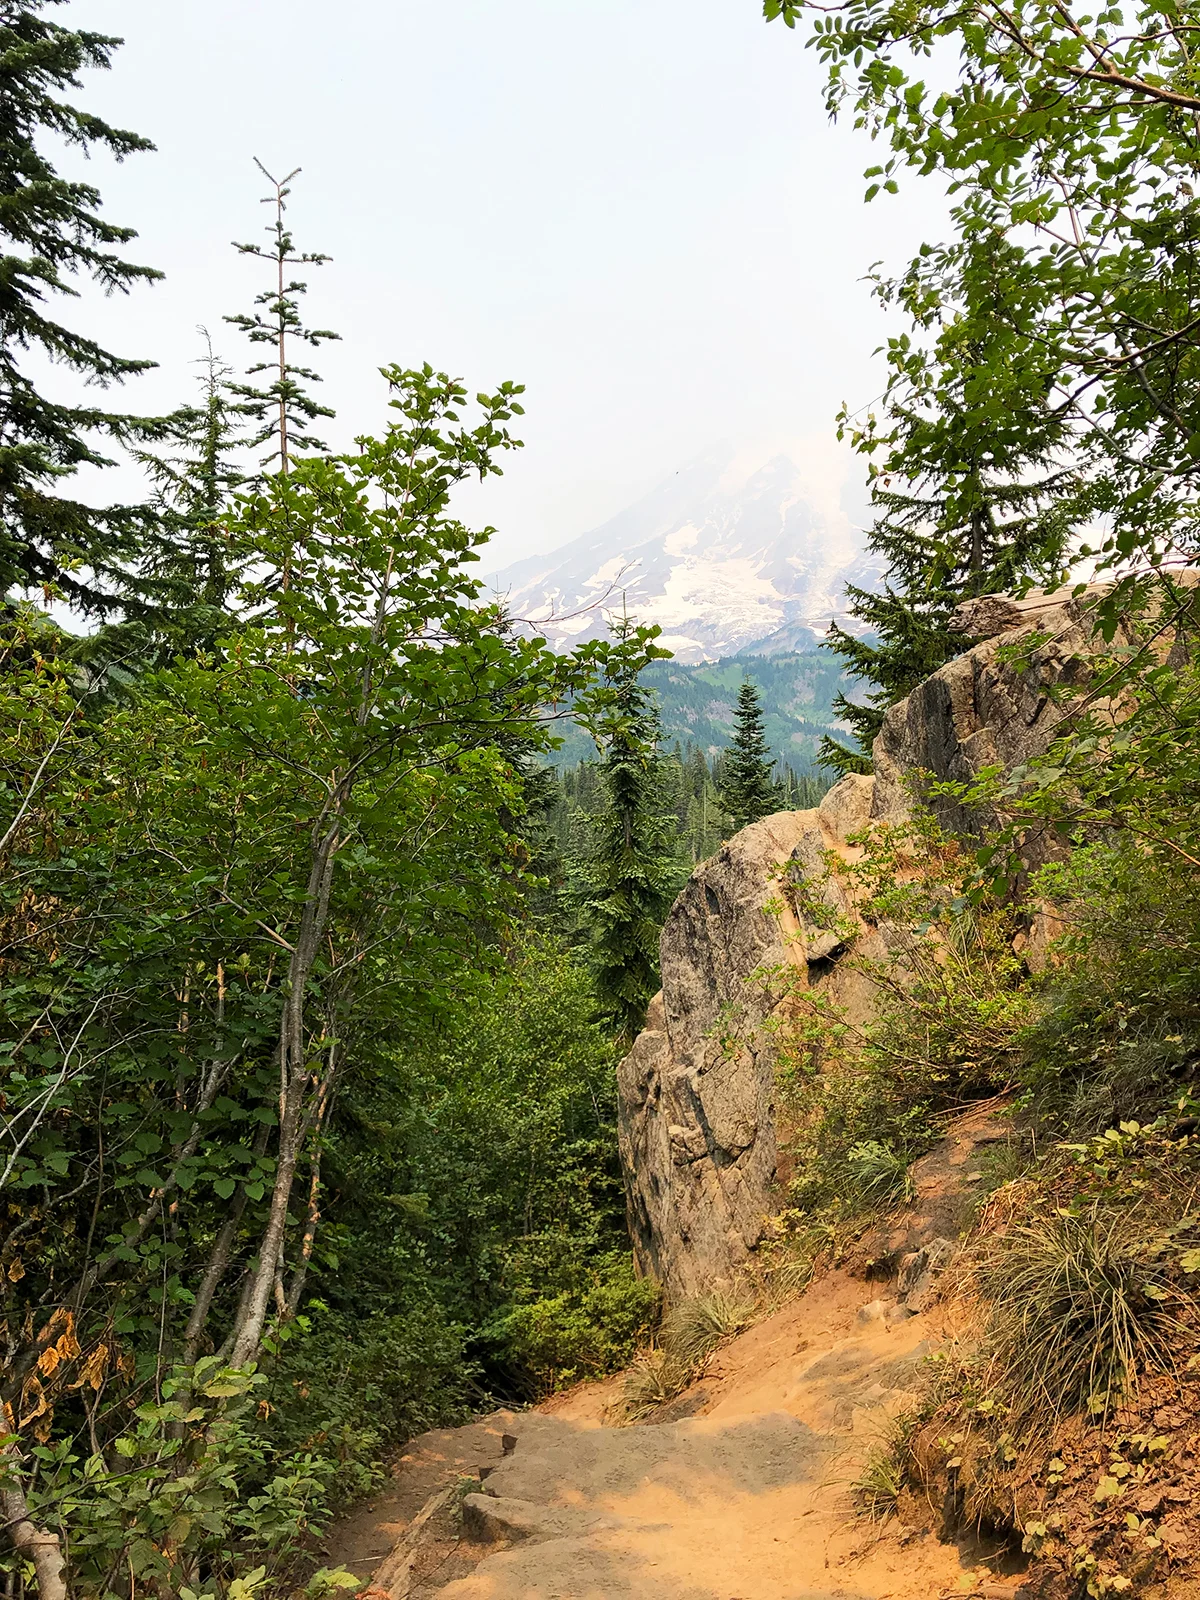 hiking trail with trees and mountain in distance on hazy day